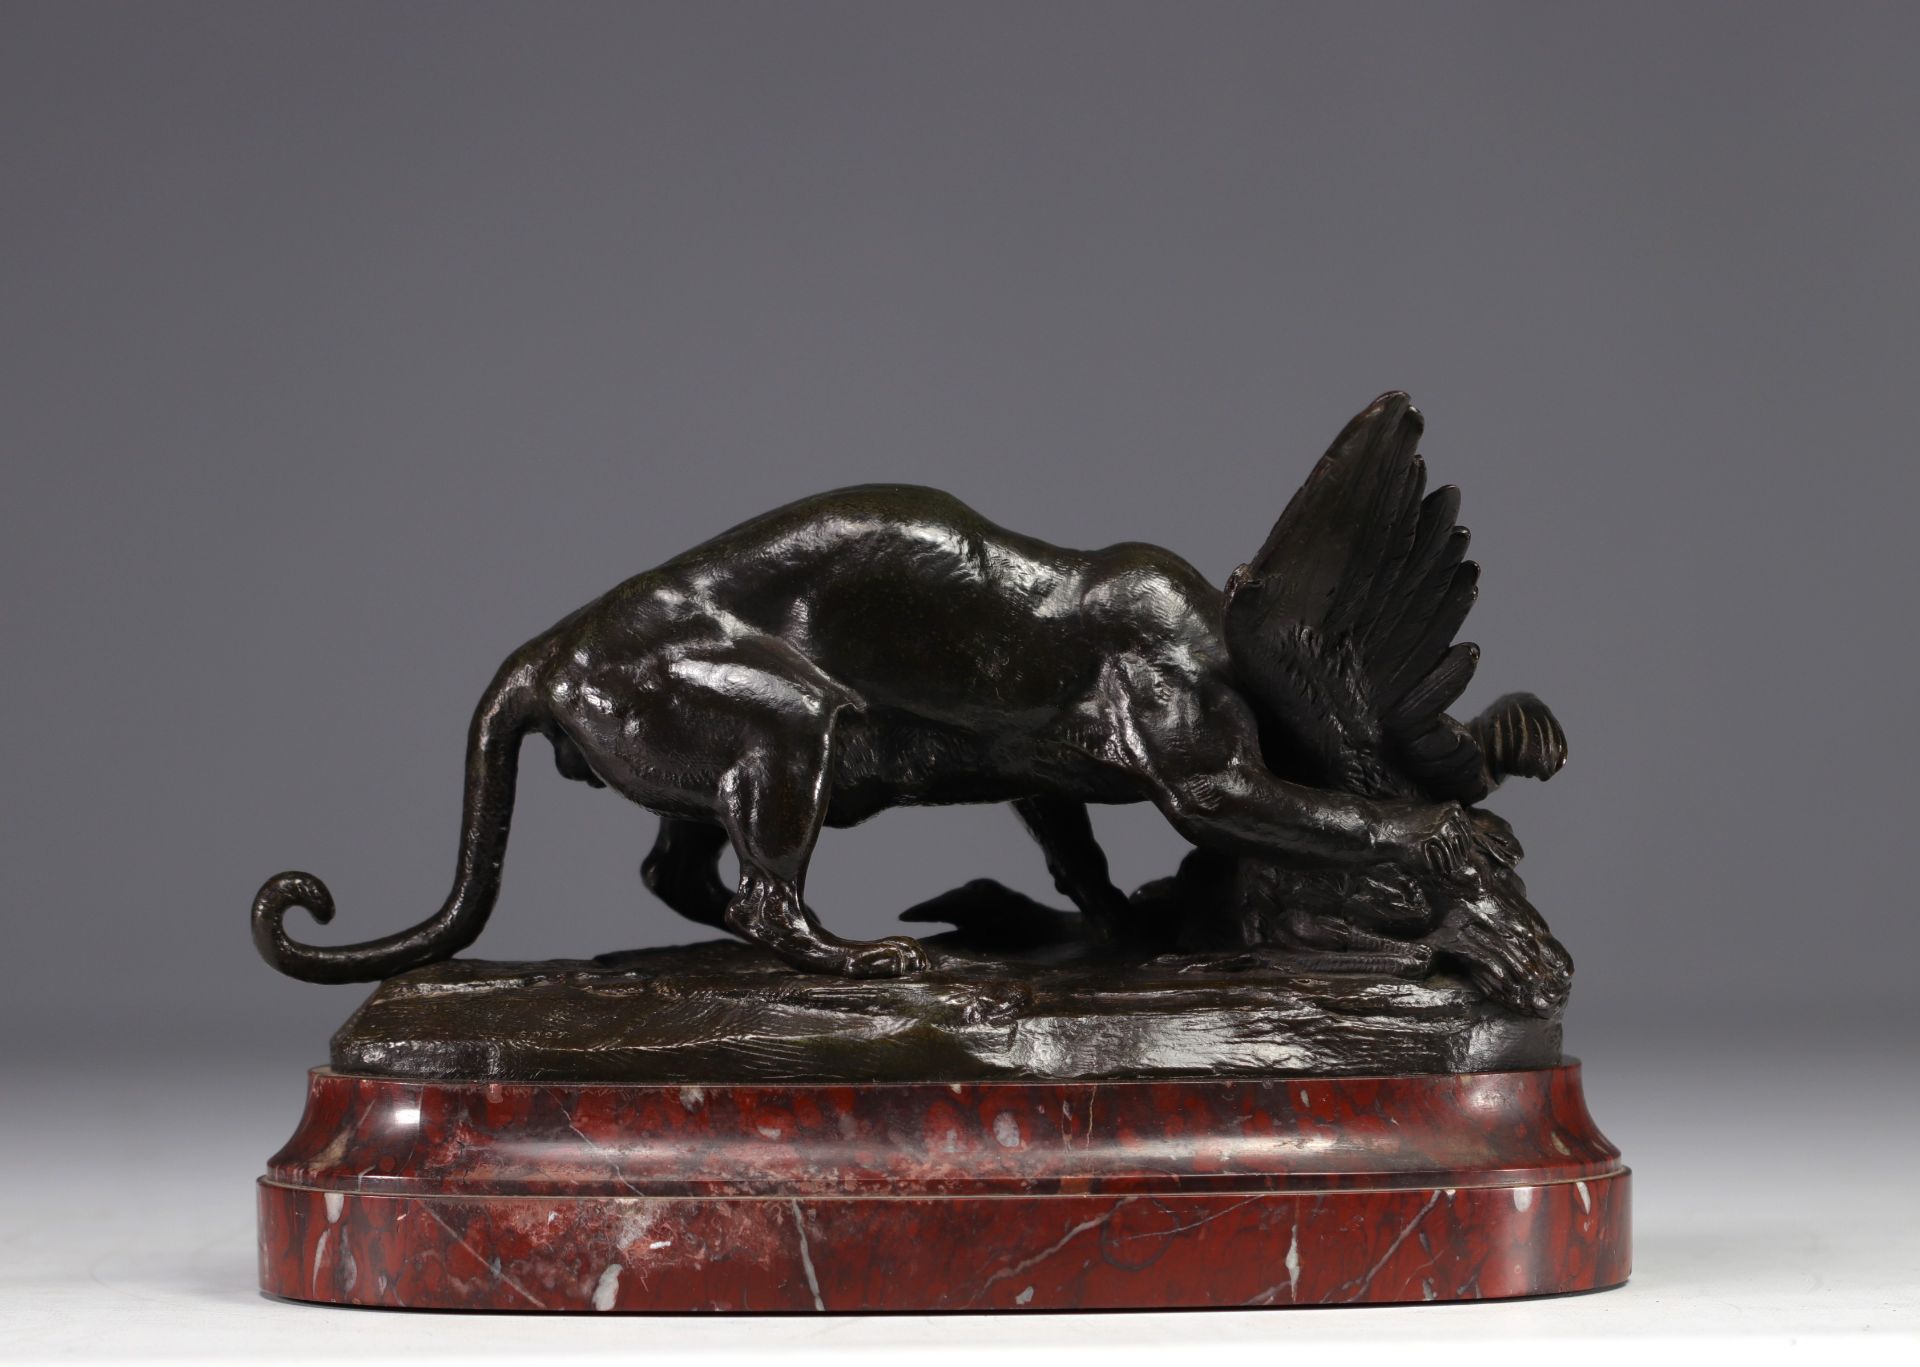 Paul Edouard DELABRIERRE (1829-1910) "Panther devouring a pelican" Bronze sculpture. - Image 4 of 4